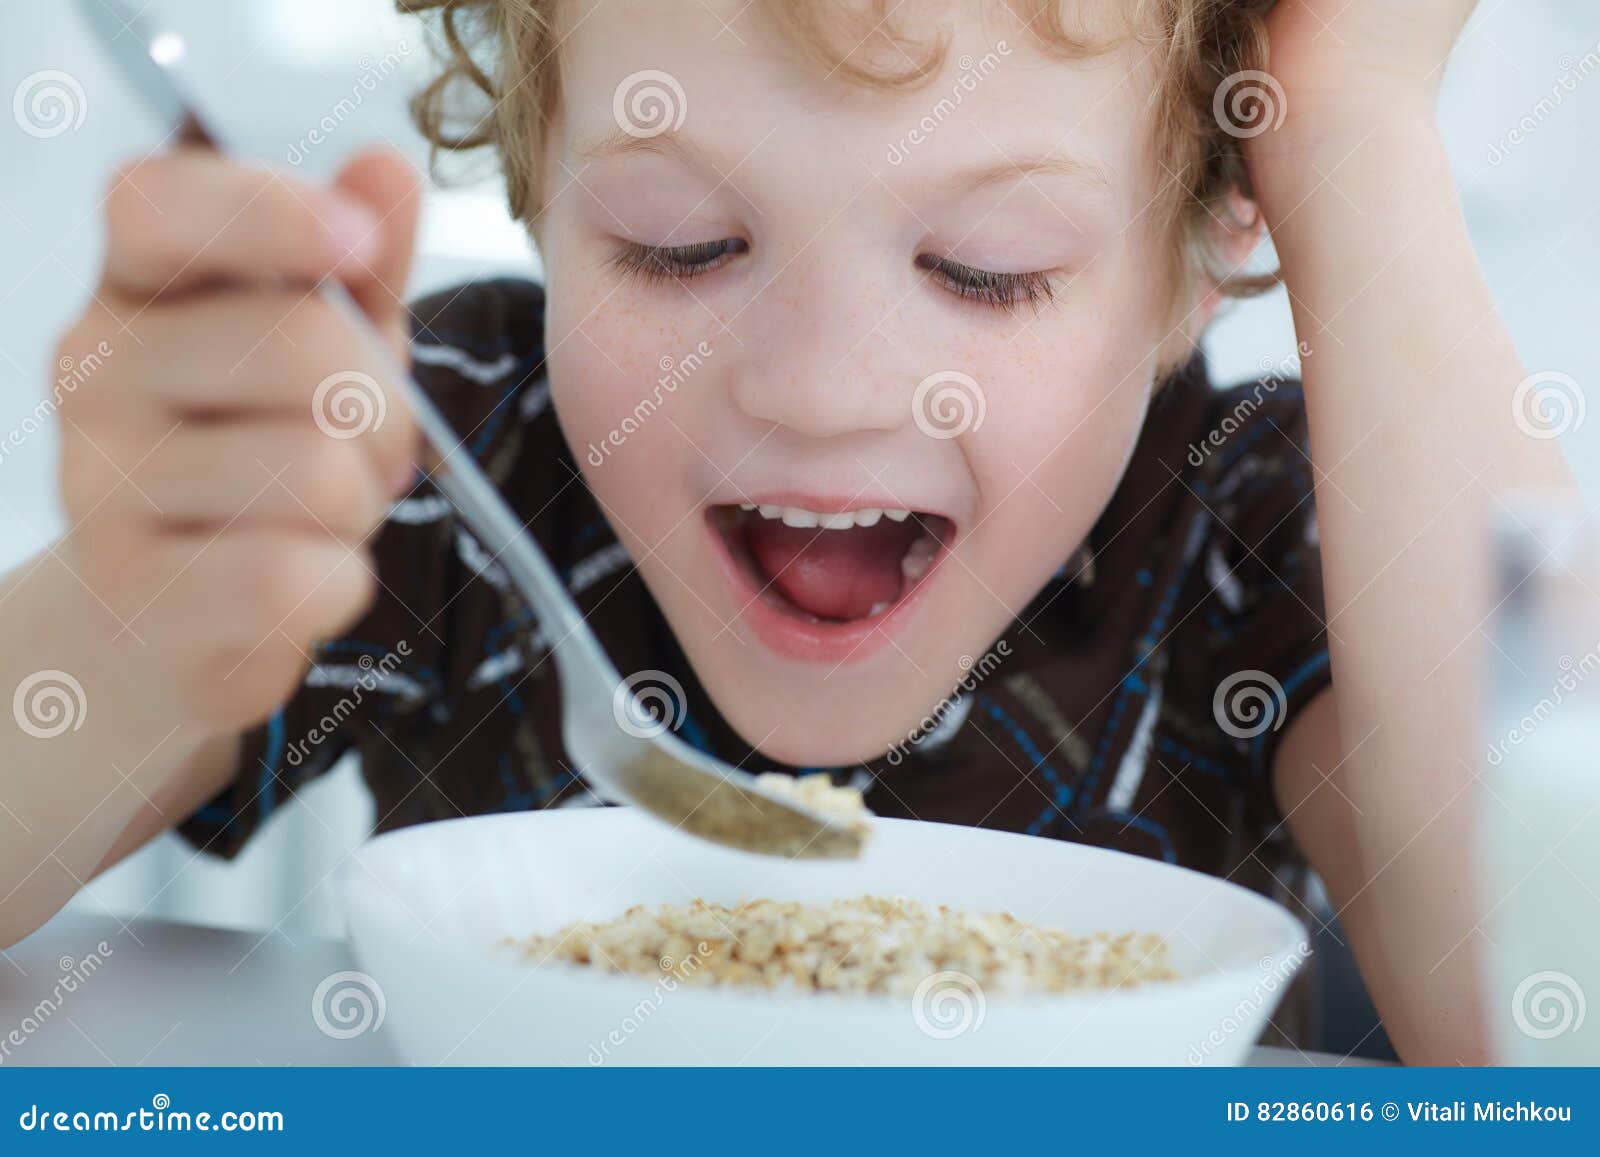 Close Up Portrait Of Boy Eating Cereal While Having Breakfast In The